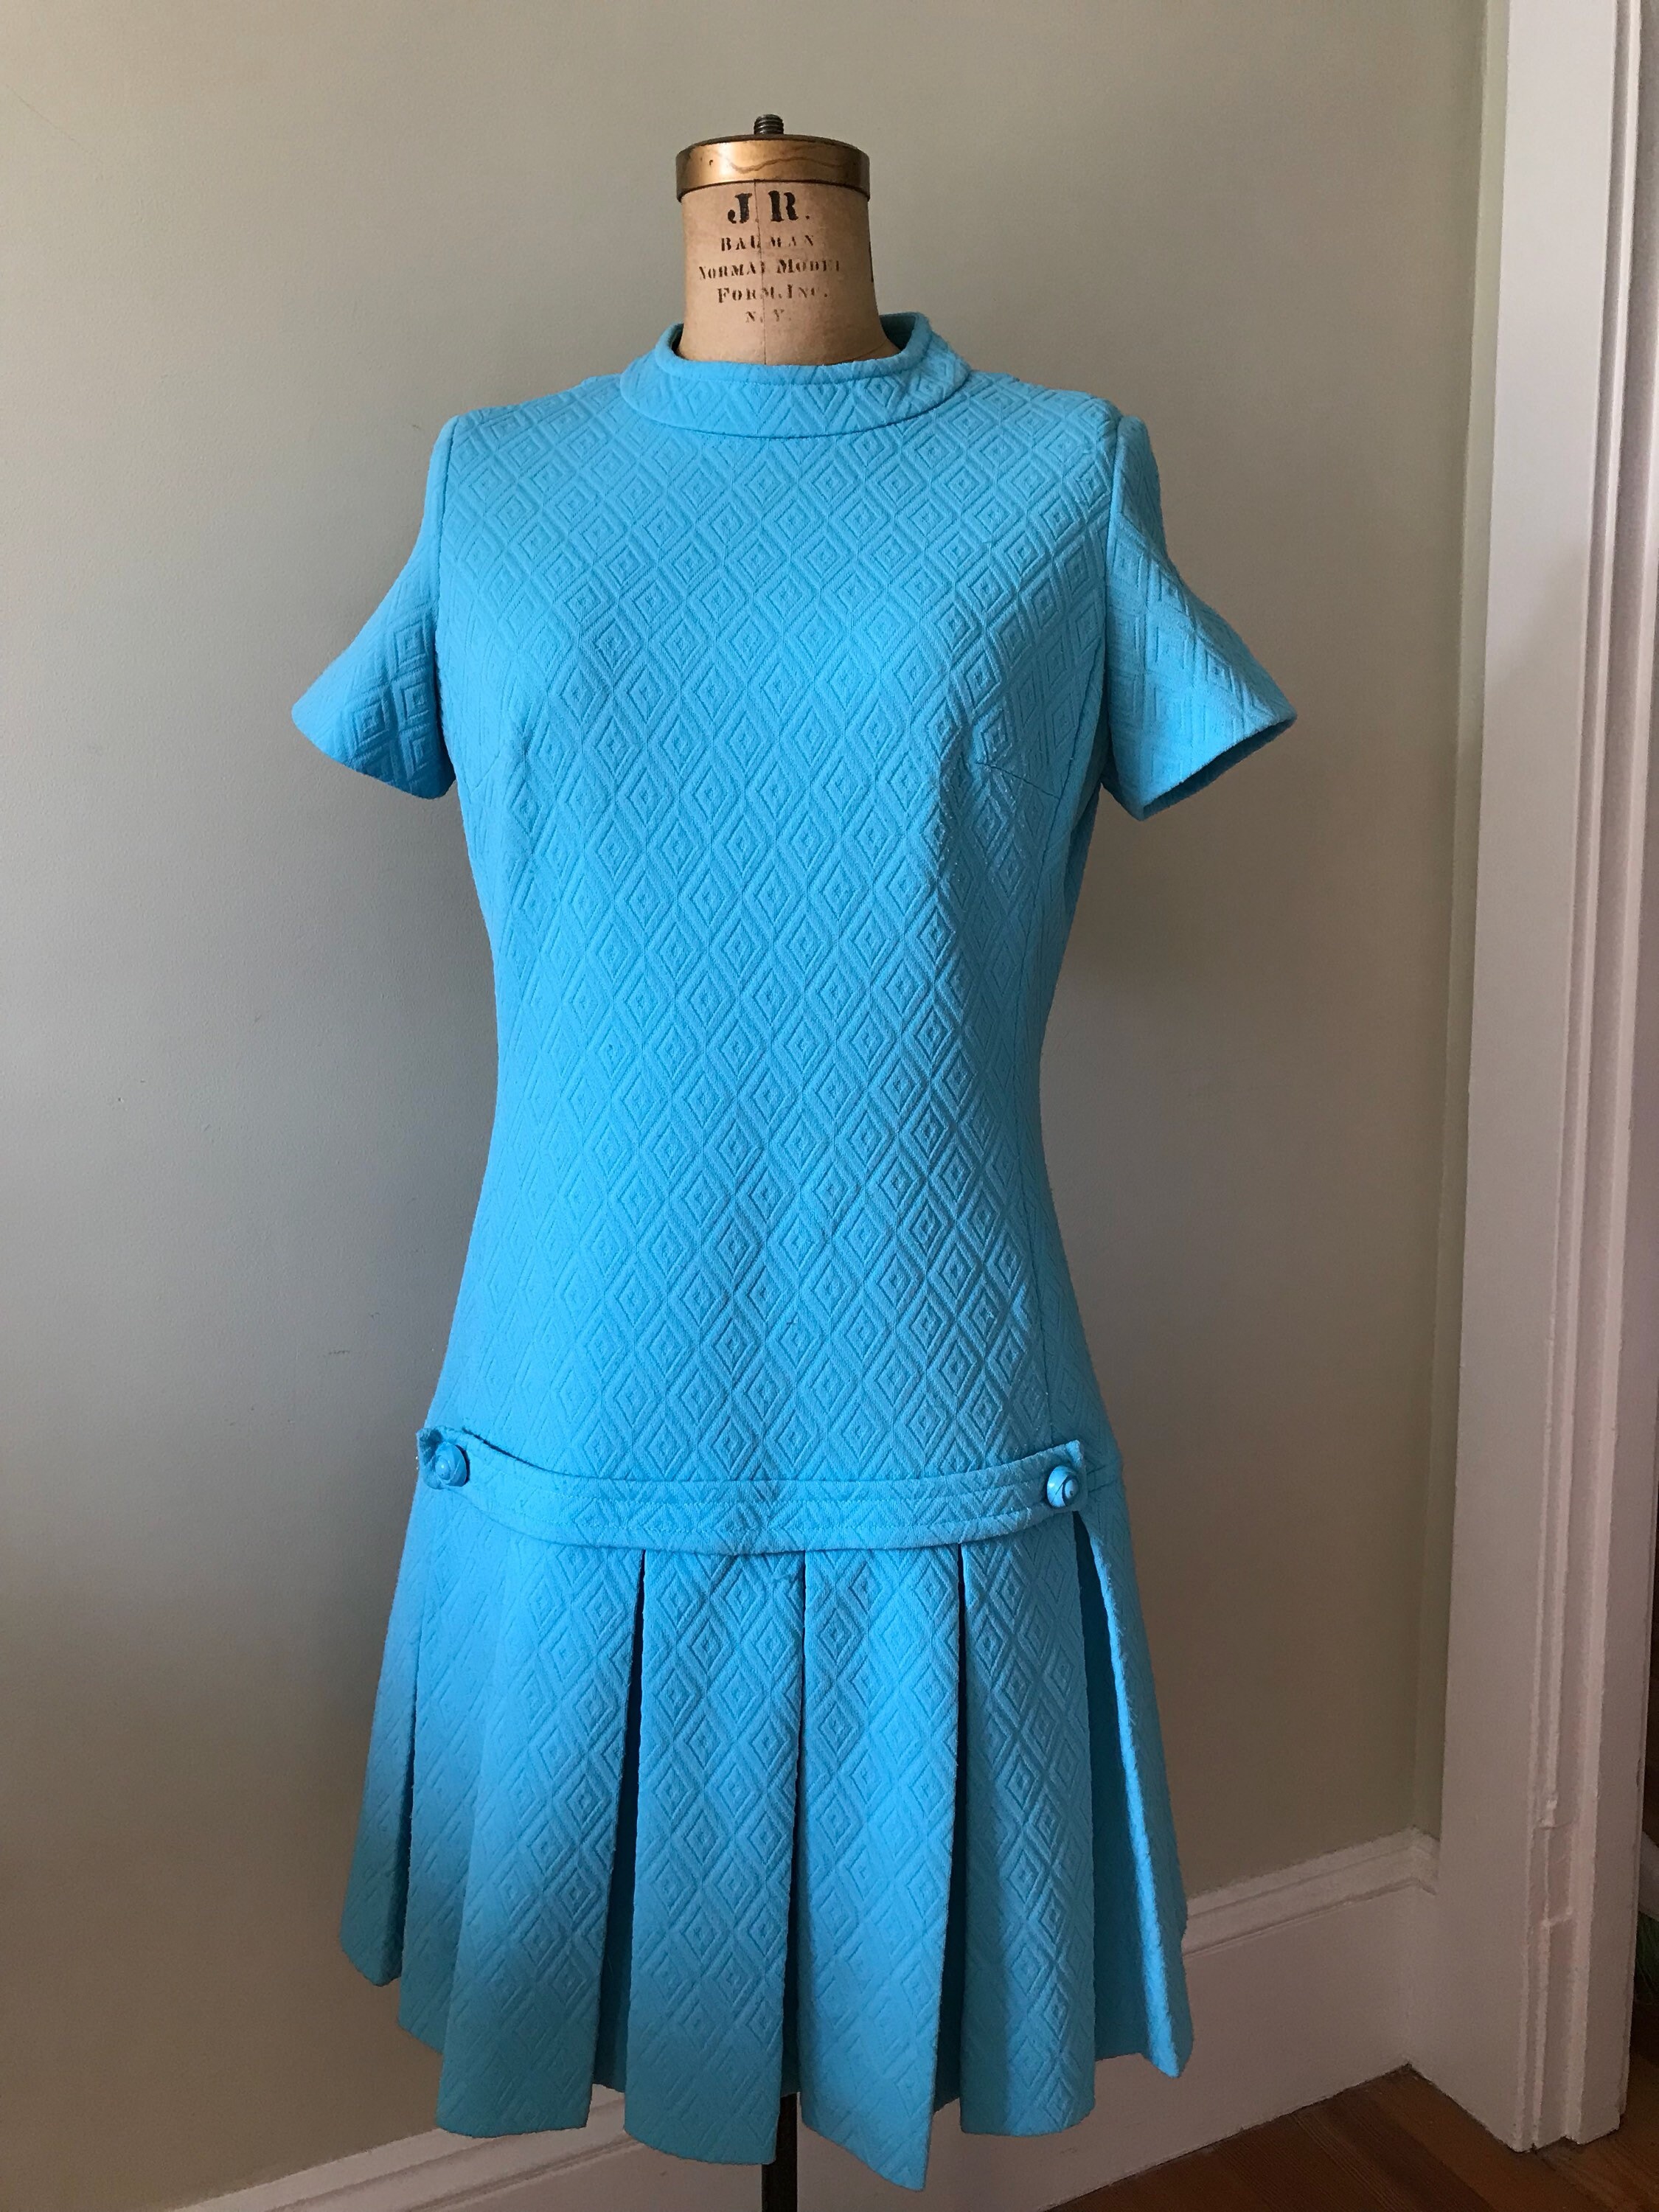 Women's Vintage Clothing / 1960's Turquoise Polyester | Etsy